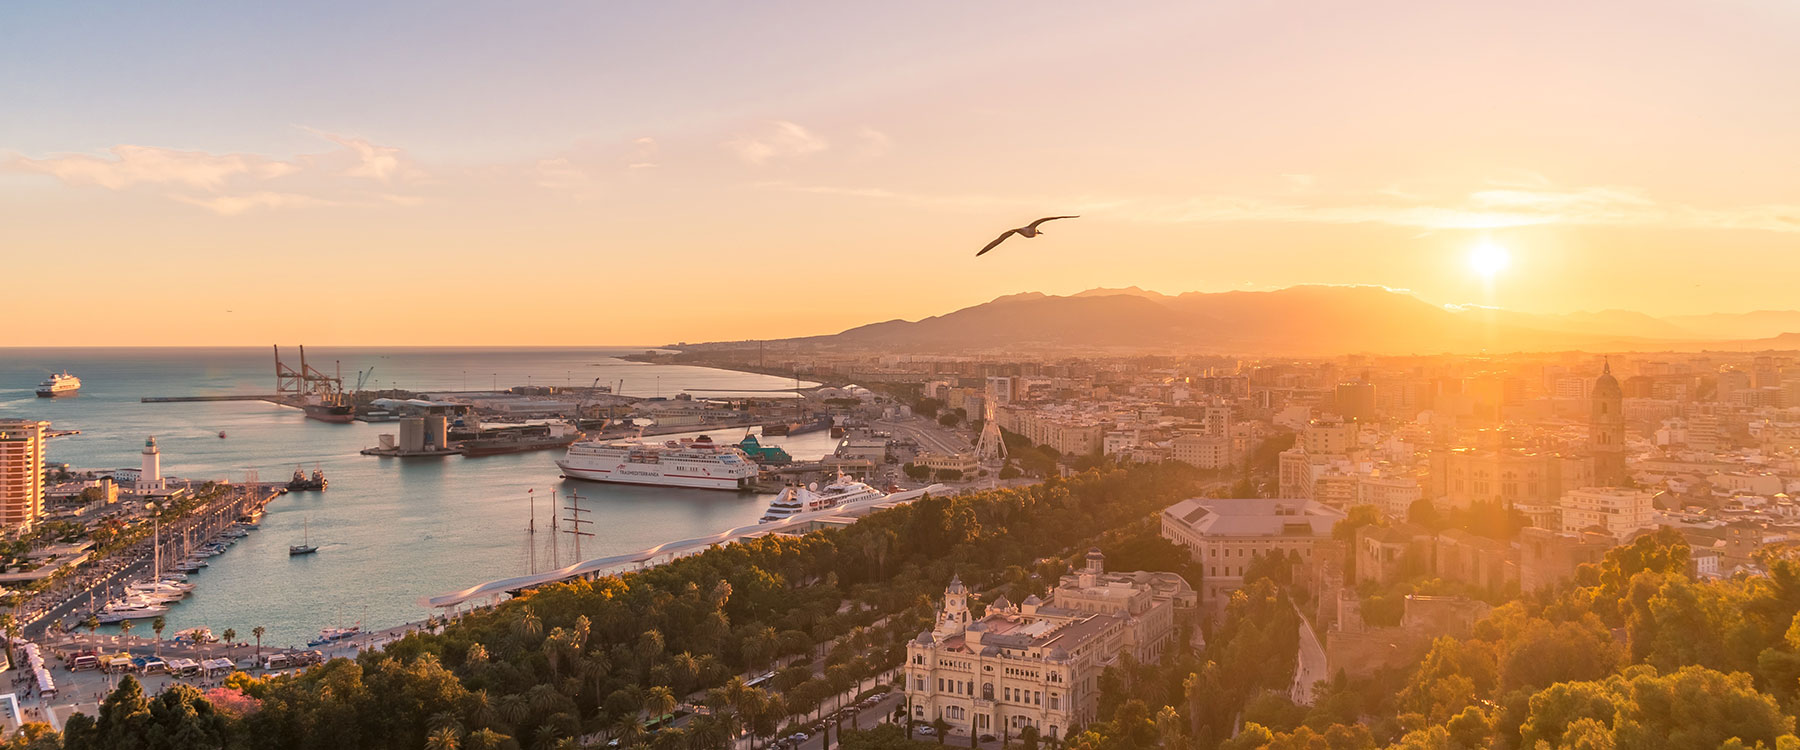 A panoramic view of a coastal city at sunset, with a bird flying over the harbor and mountains in the background.